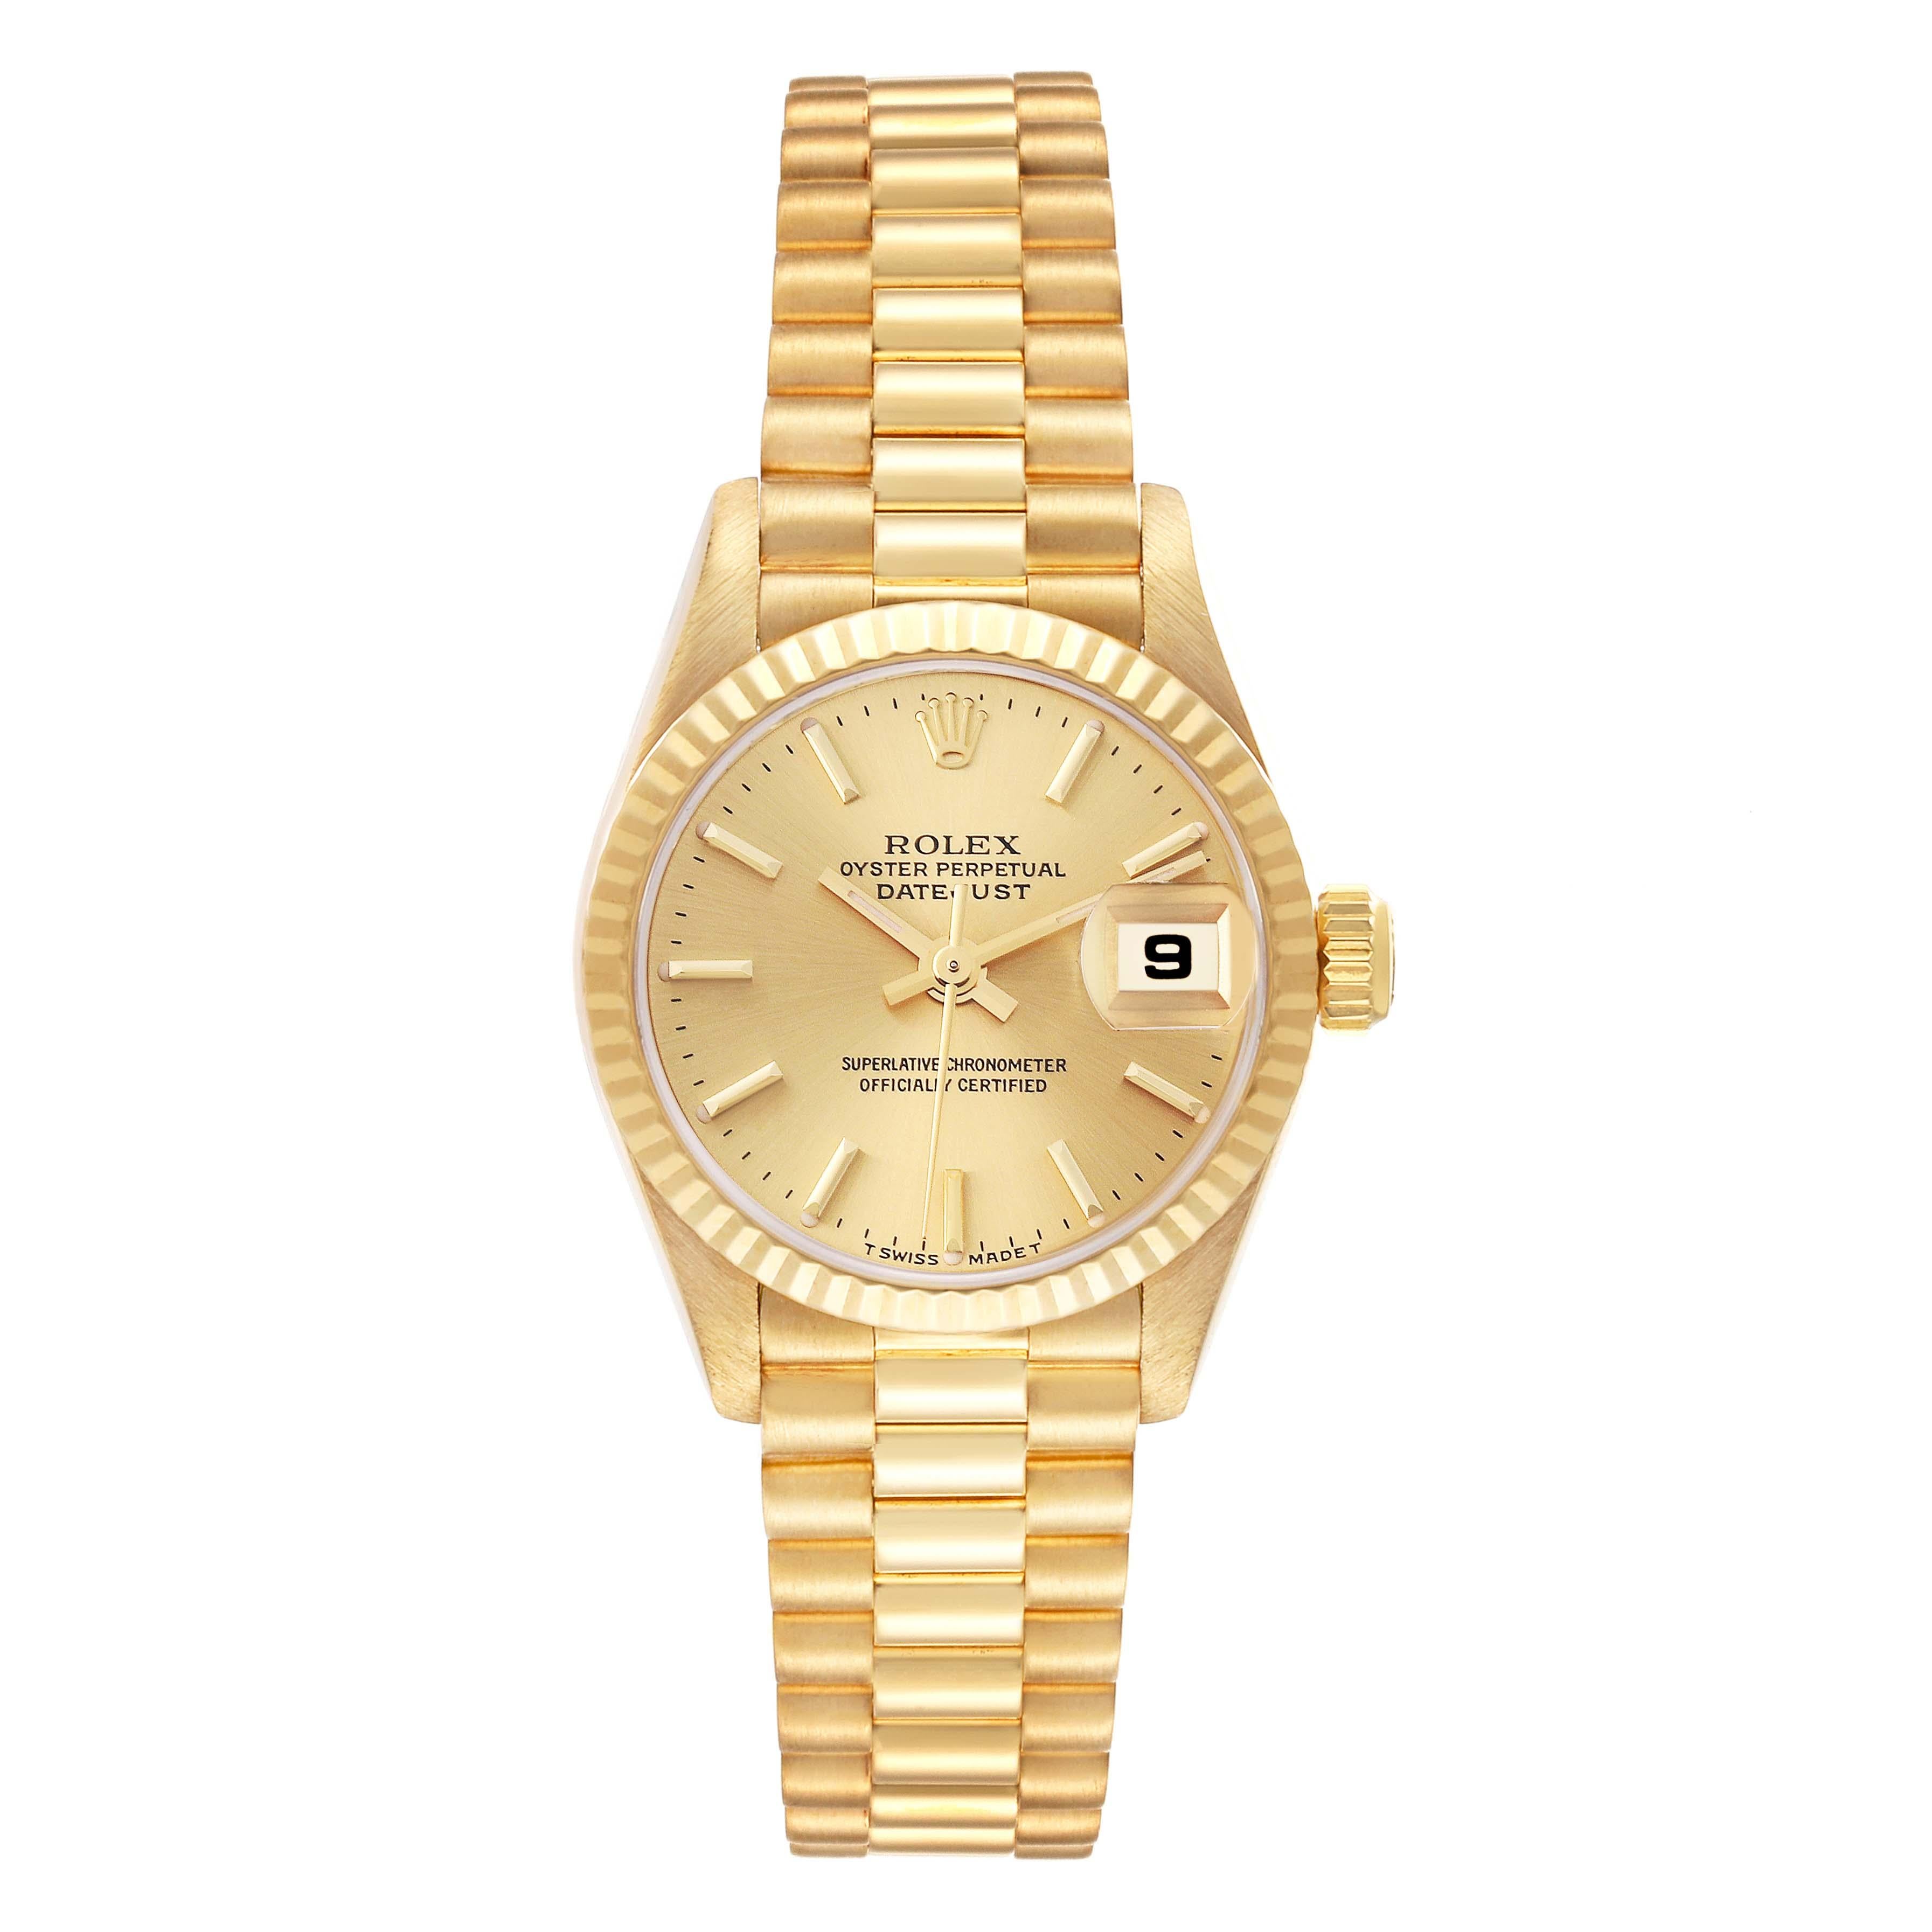 Rolex President Datejust 26mm Yellow Gold Ladies Watch 79178. Officially certified chronometer self-winding movement with quickset date function. 18k yellow gold oyster case 26 mm in diameter. Rolex logo on a crown. 18k yellow gold fluted bezel.